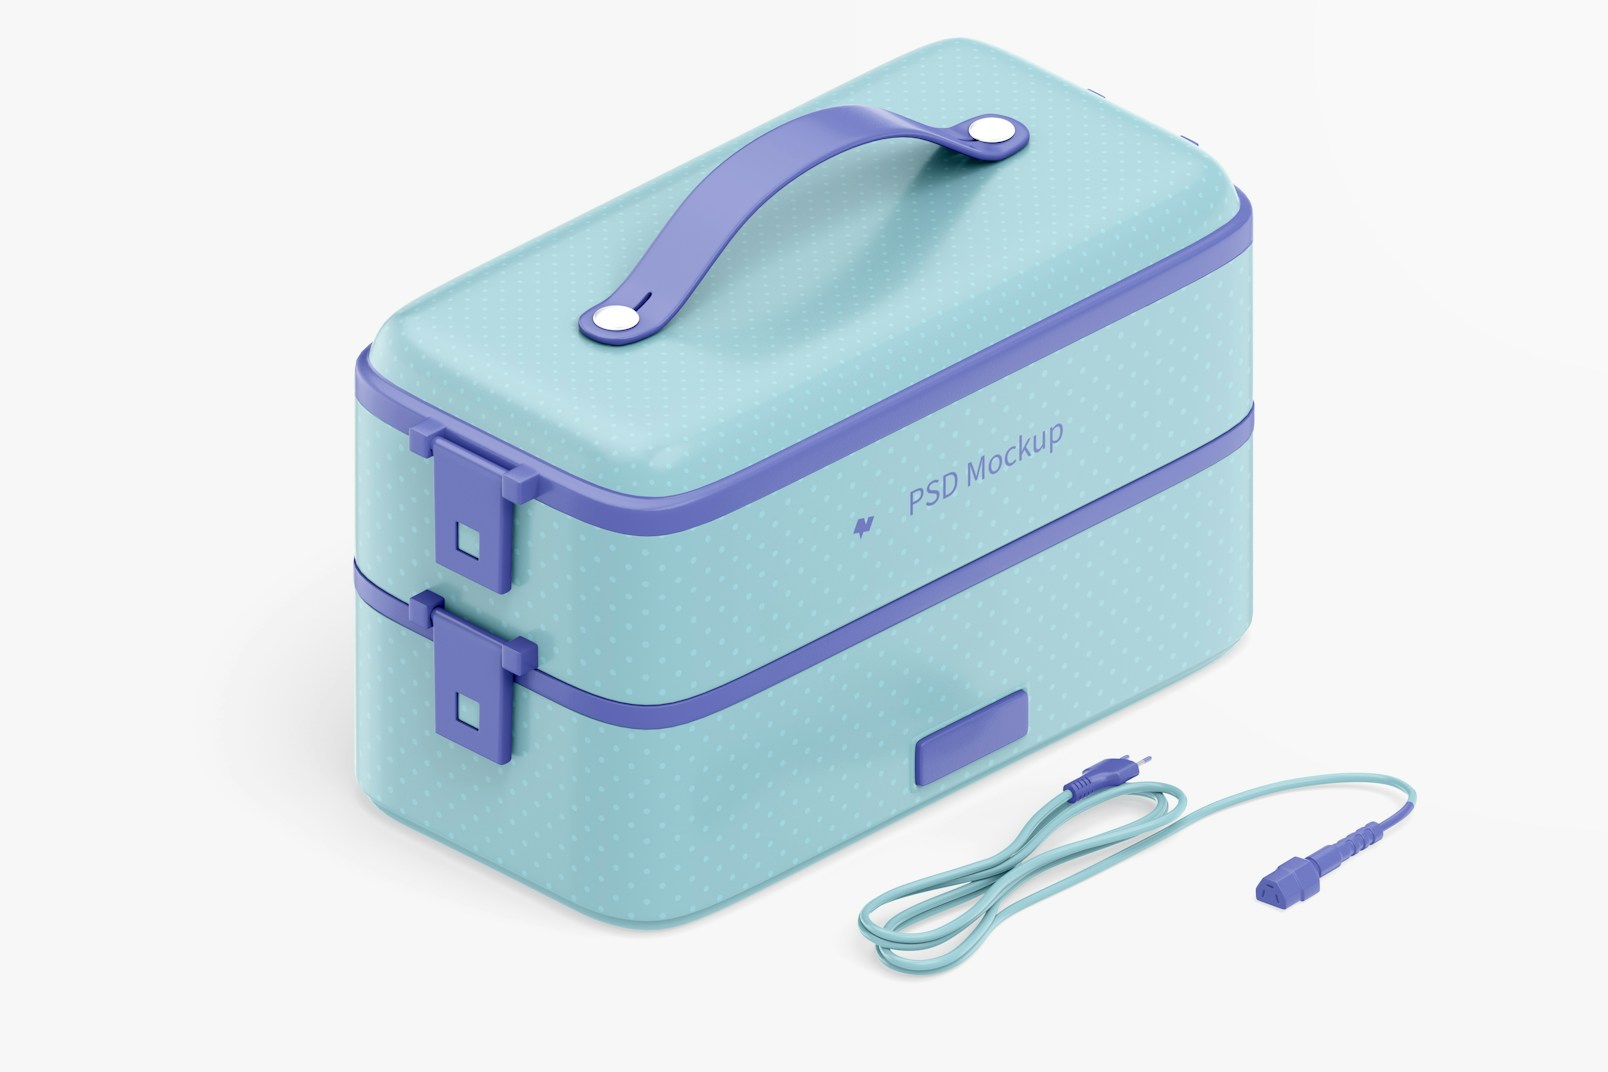 Portable Electric Lunch Box Mockup, Isometric View